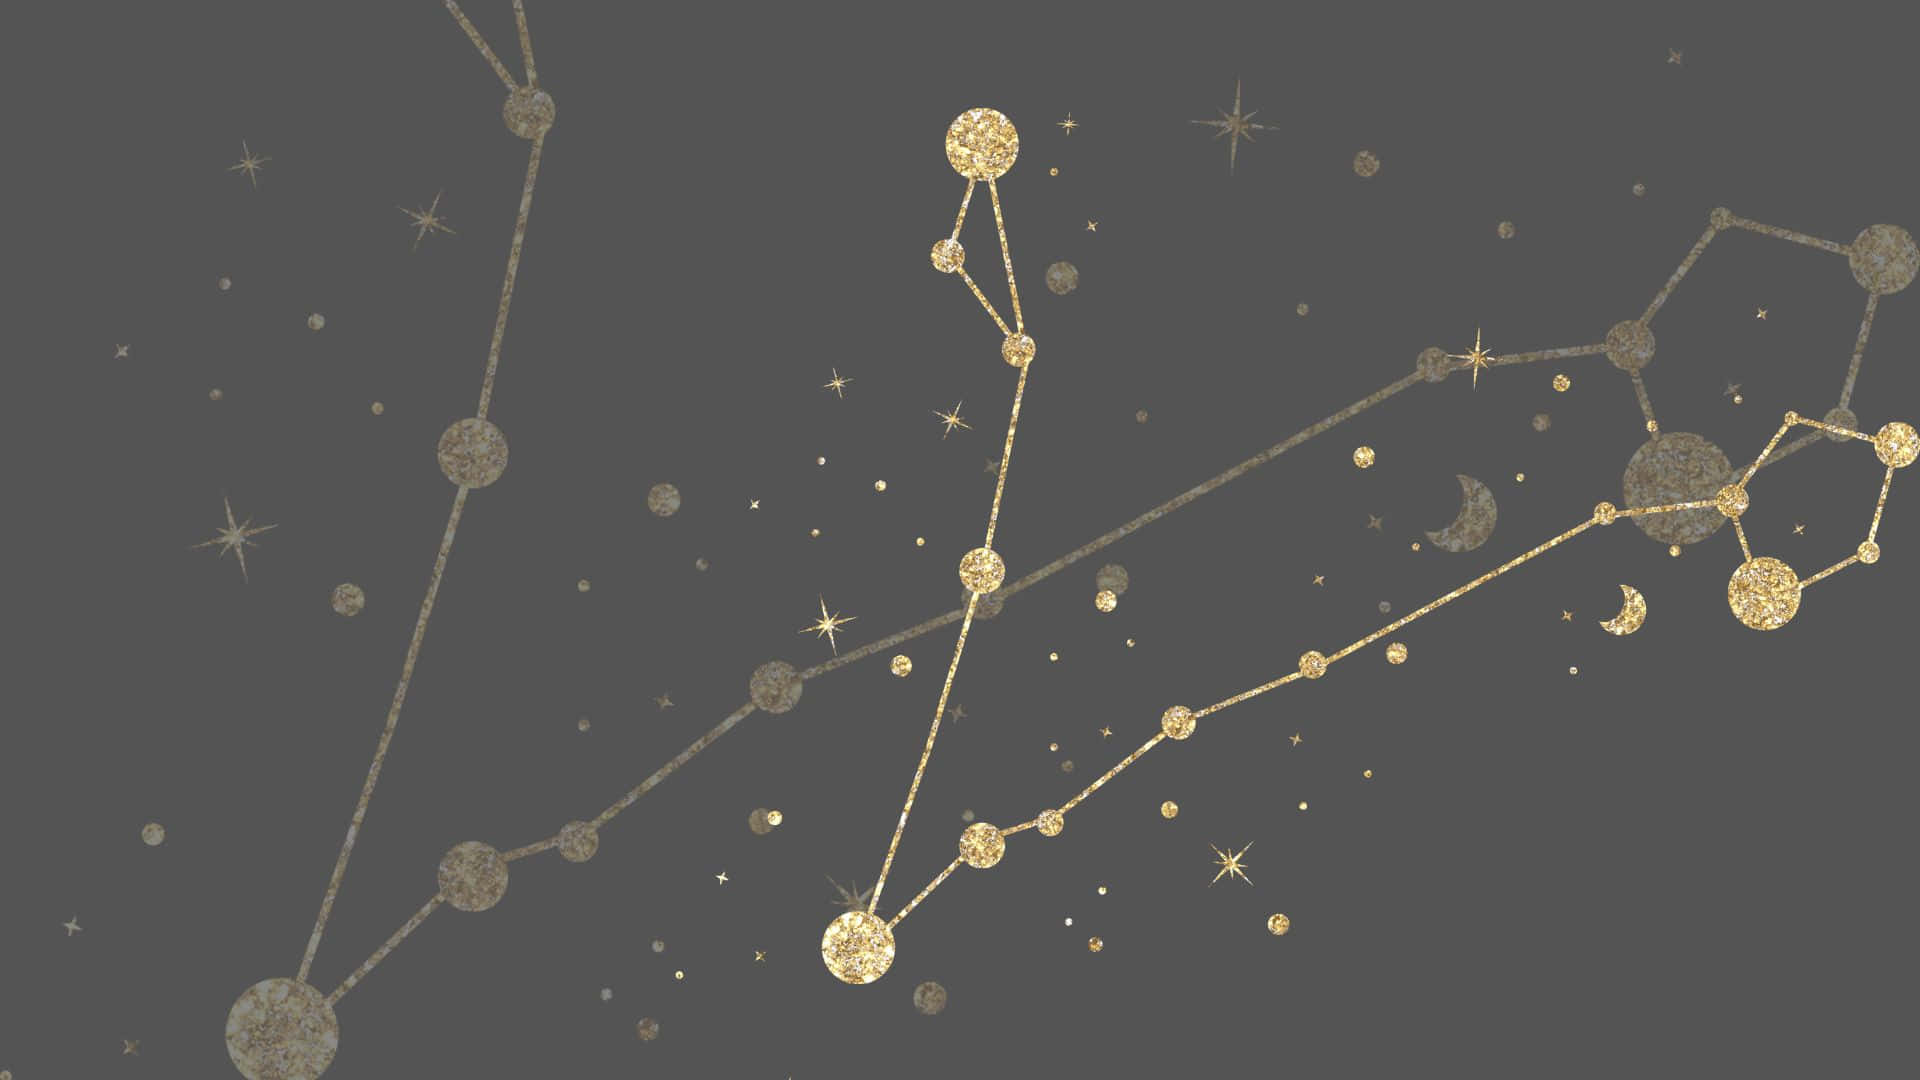 Caption: The Celestial Map: Constellations Night Sky Wallpaper